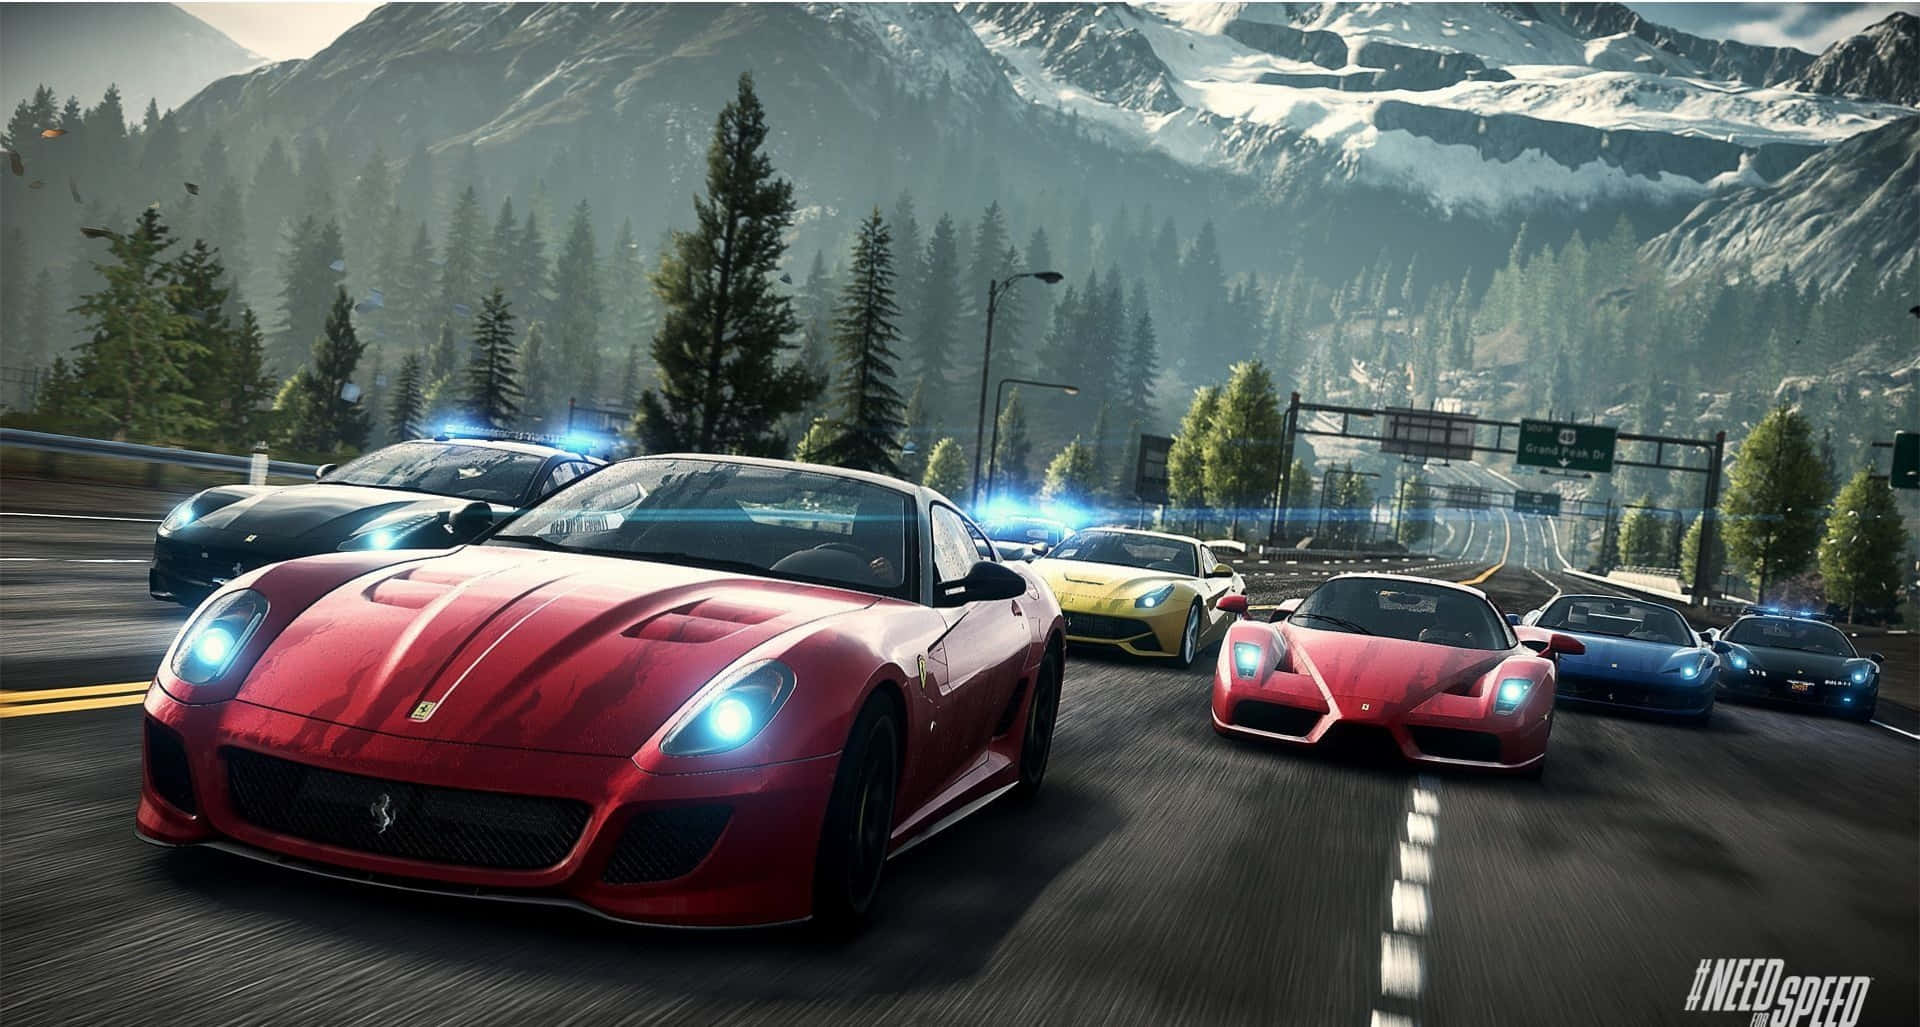 Fast and furious - The Need for Speed for PC Wallpaper